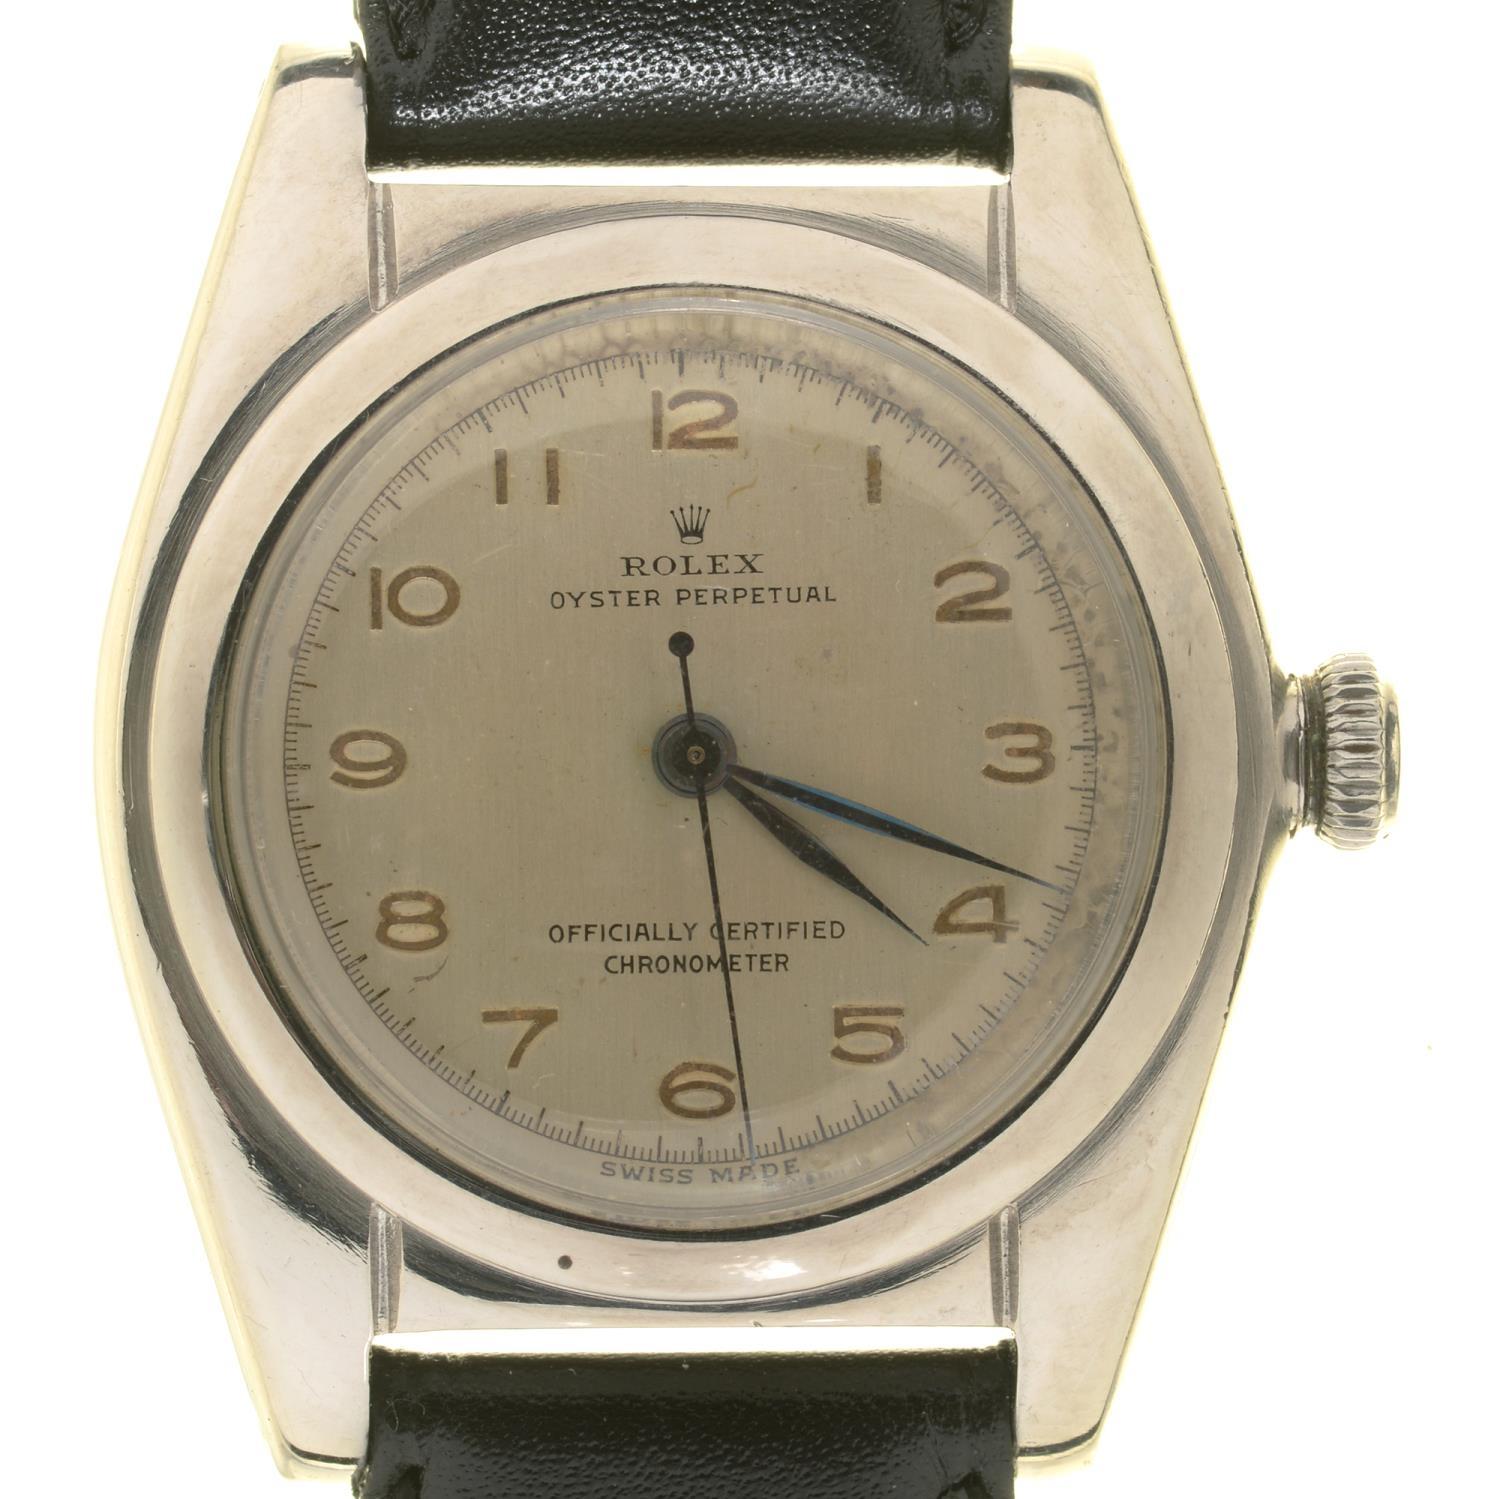 A ROLEX STAINLESS STEEL WRISTWATCH OYSTER PERPETUAL   Ref 2940 No 396252, winding crown marked ROLEX